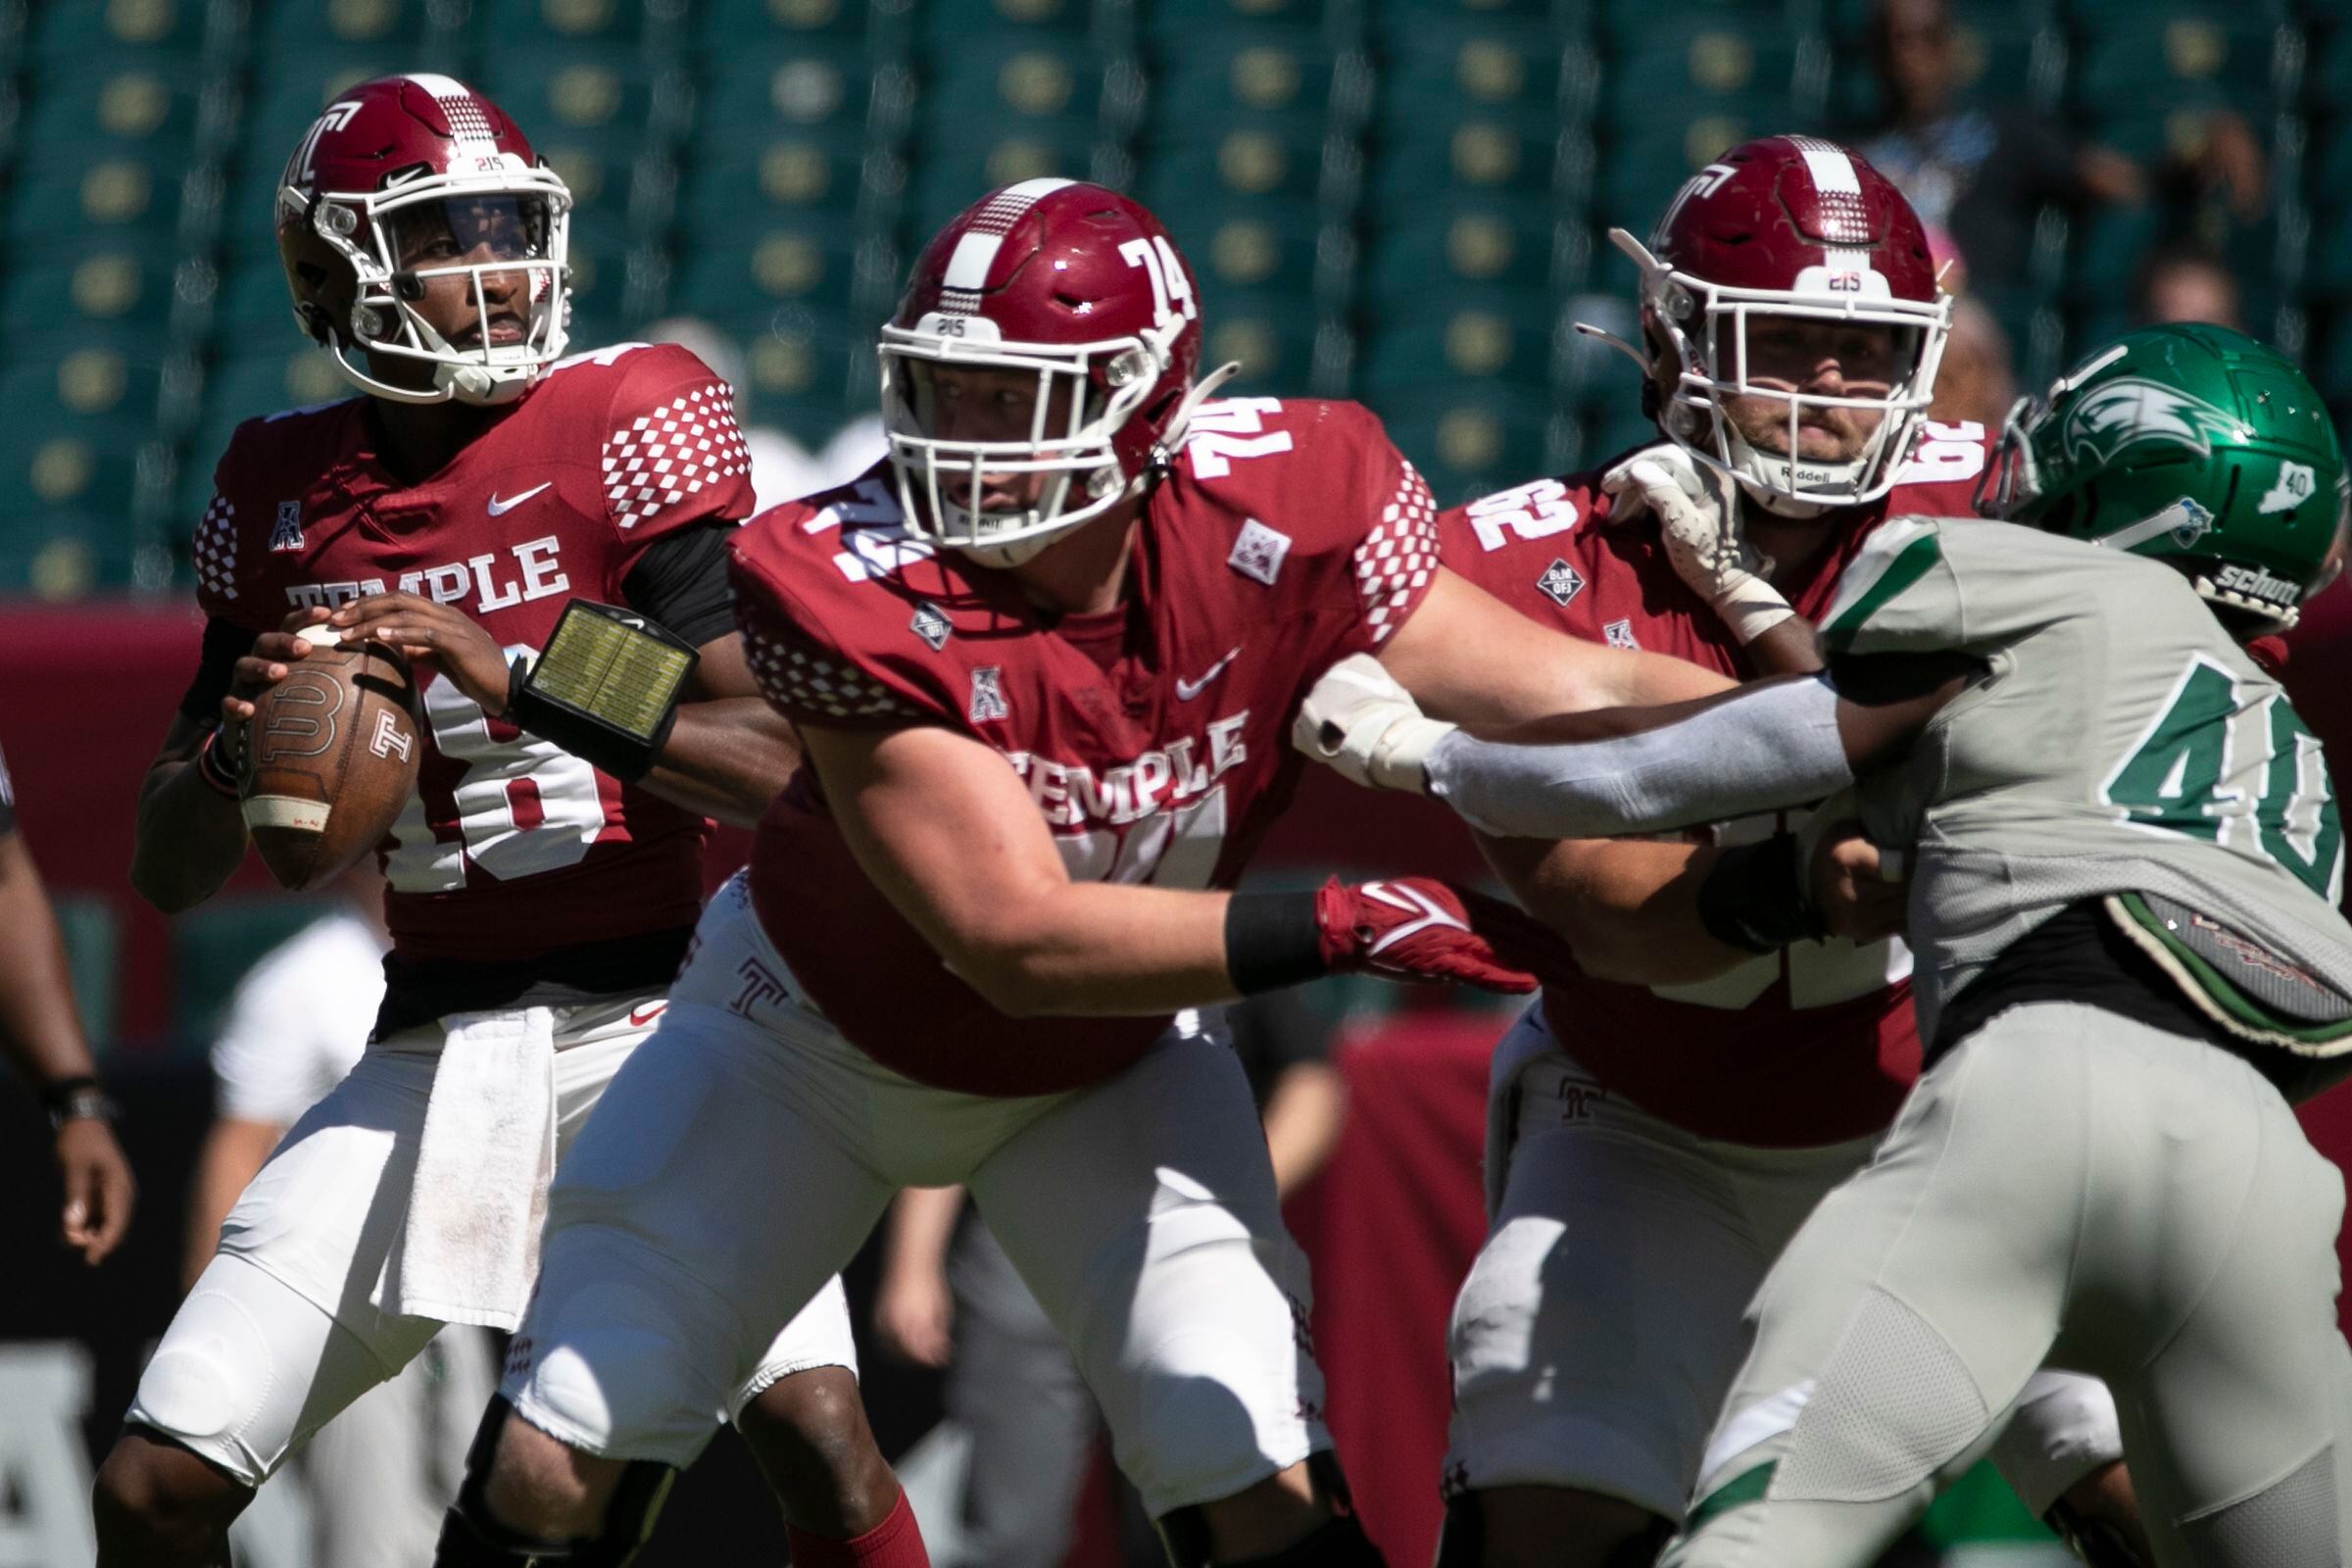 Temple rebounds from loss to smash Wagner, 41-7